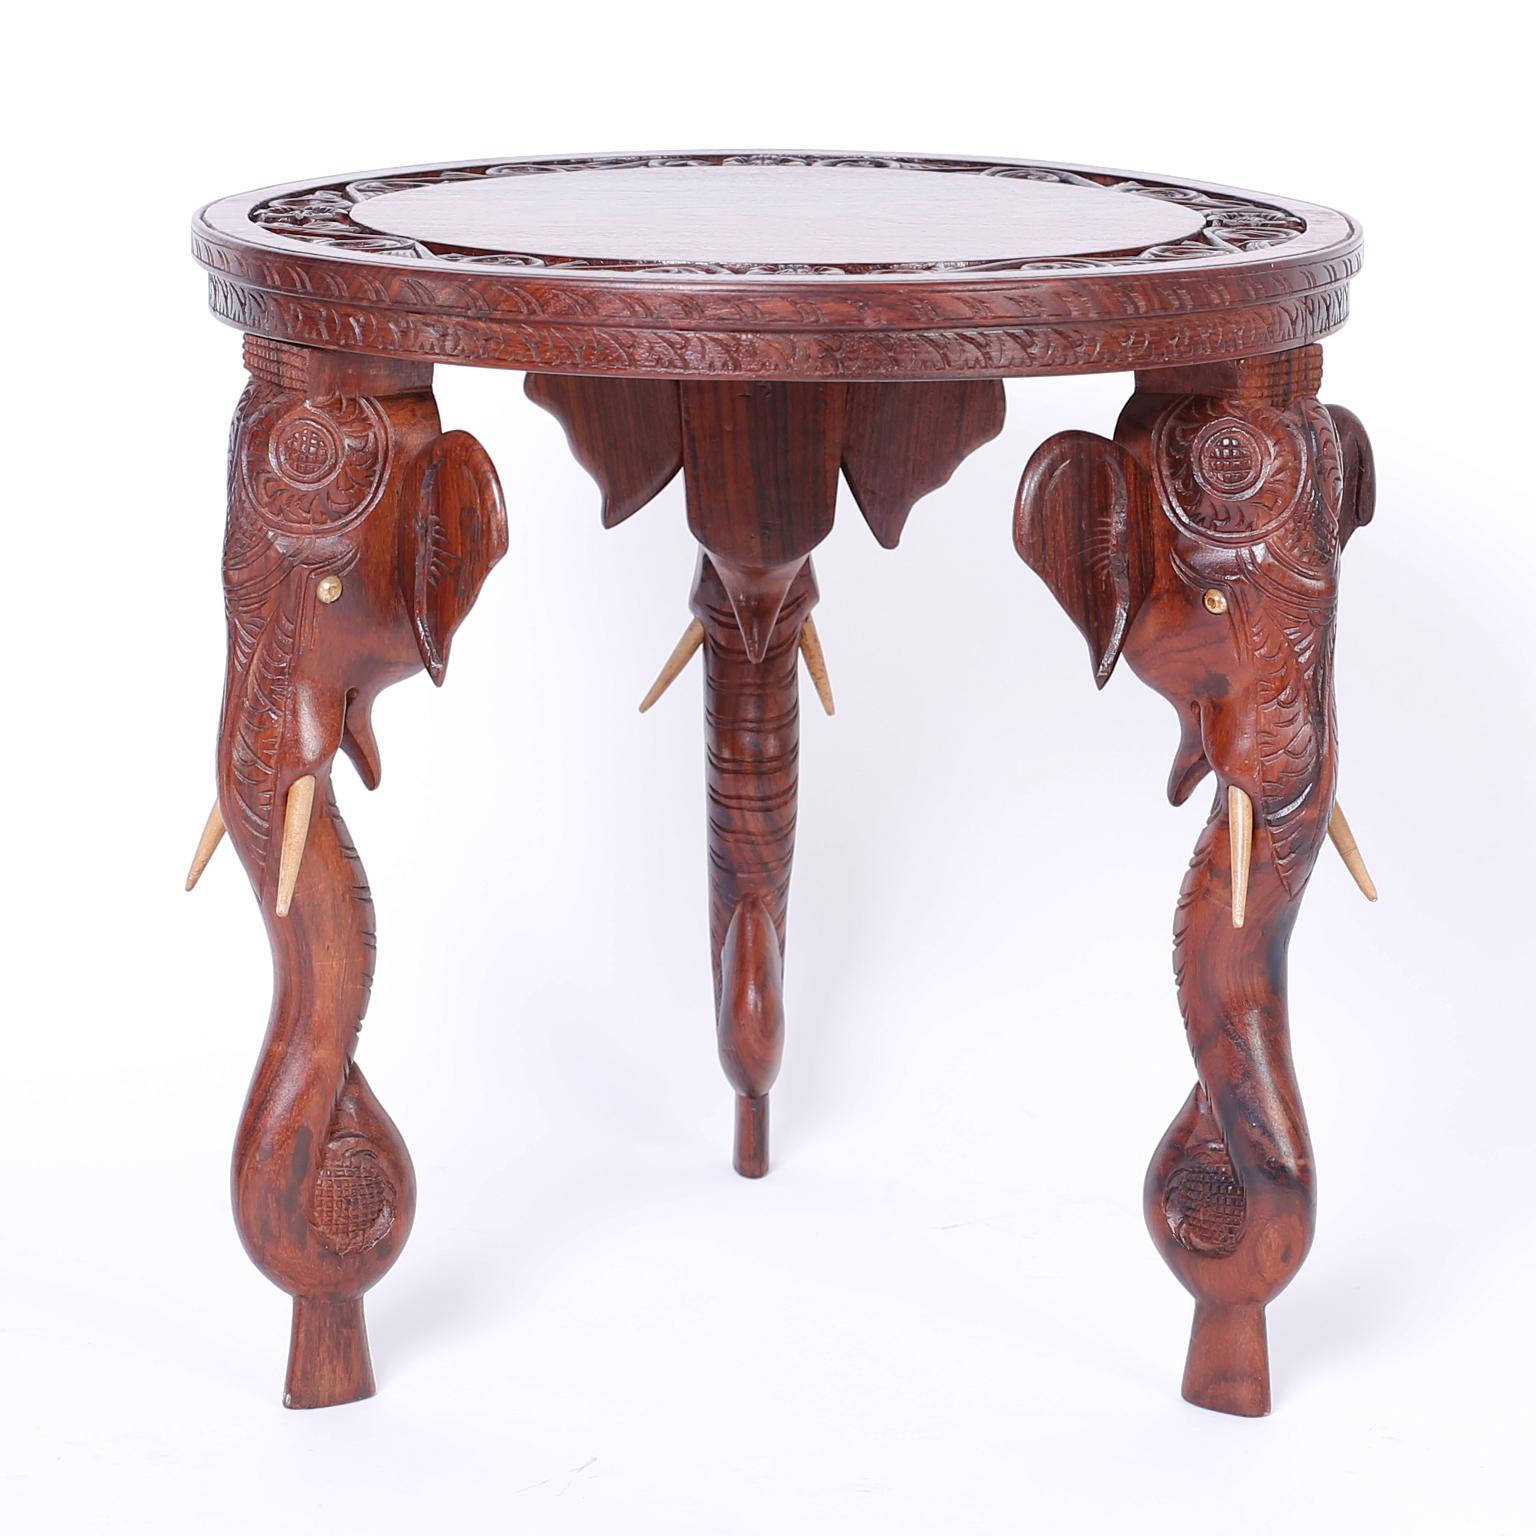 Exotic pair of Anglo-Indian round rosewood tables with carved floral borders on the tops and three carved elephant head legs with bone tusks.